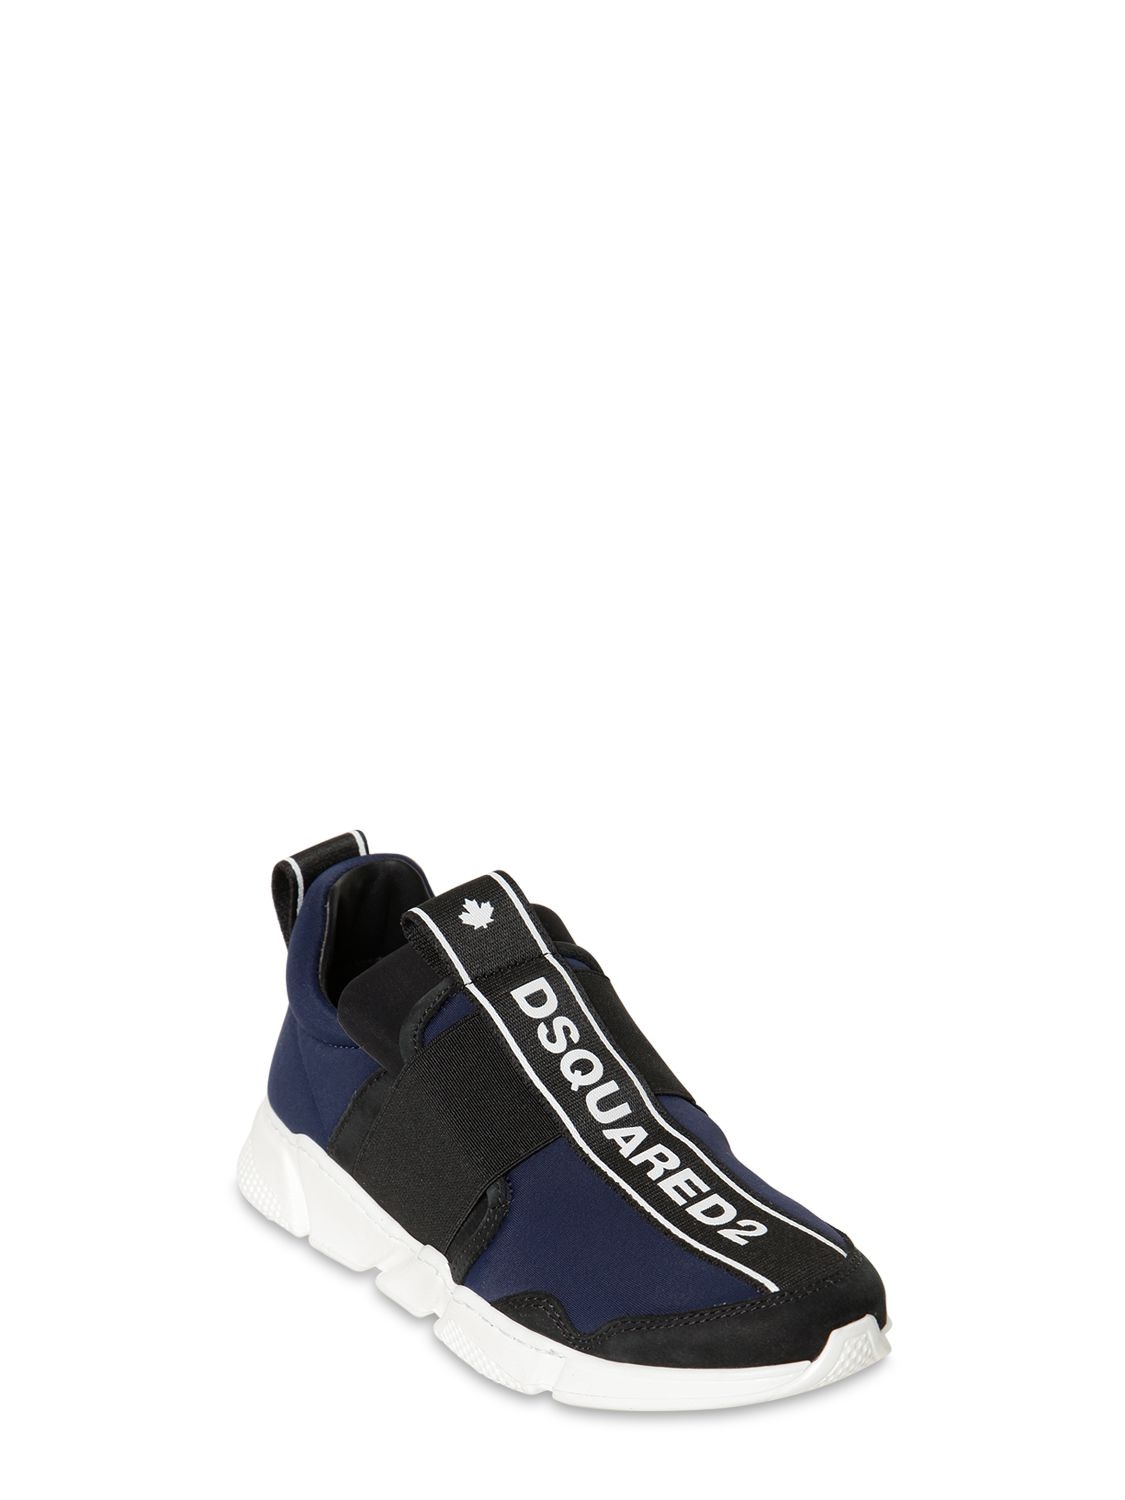 Dsquared2 Kids' Slip-on Sneakers W/ Elastic Bands In Navy